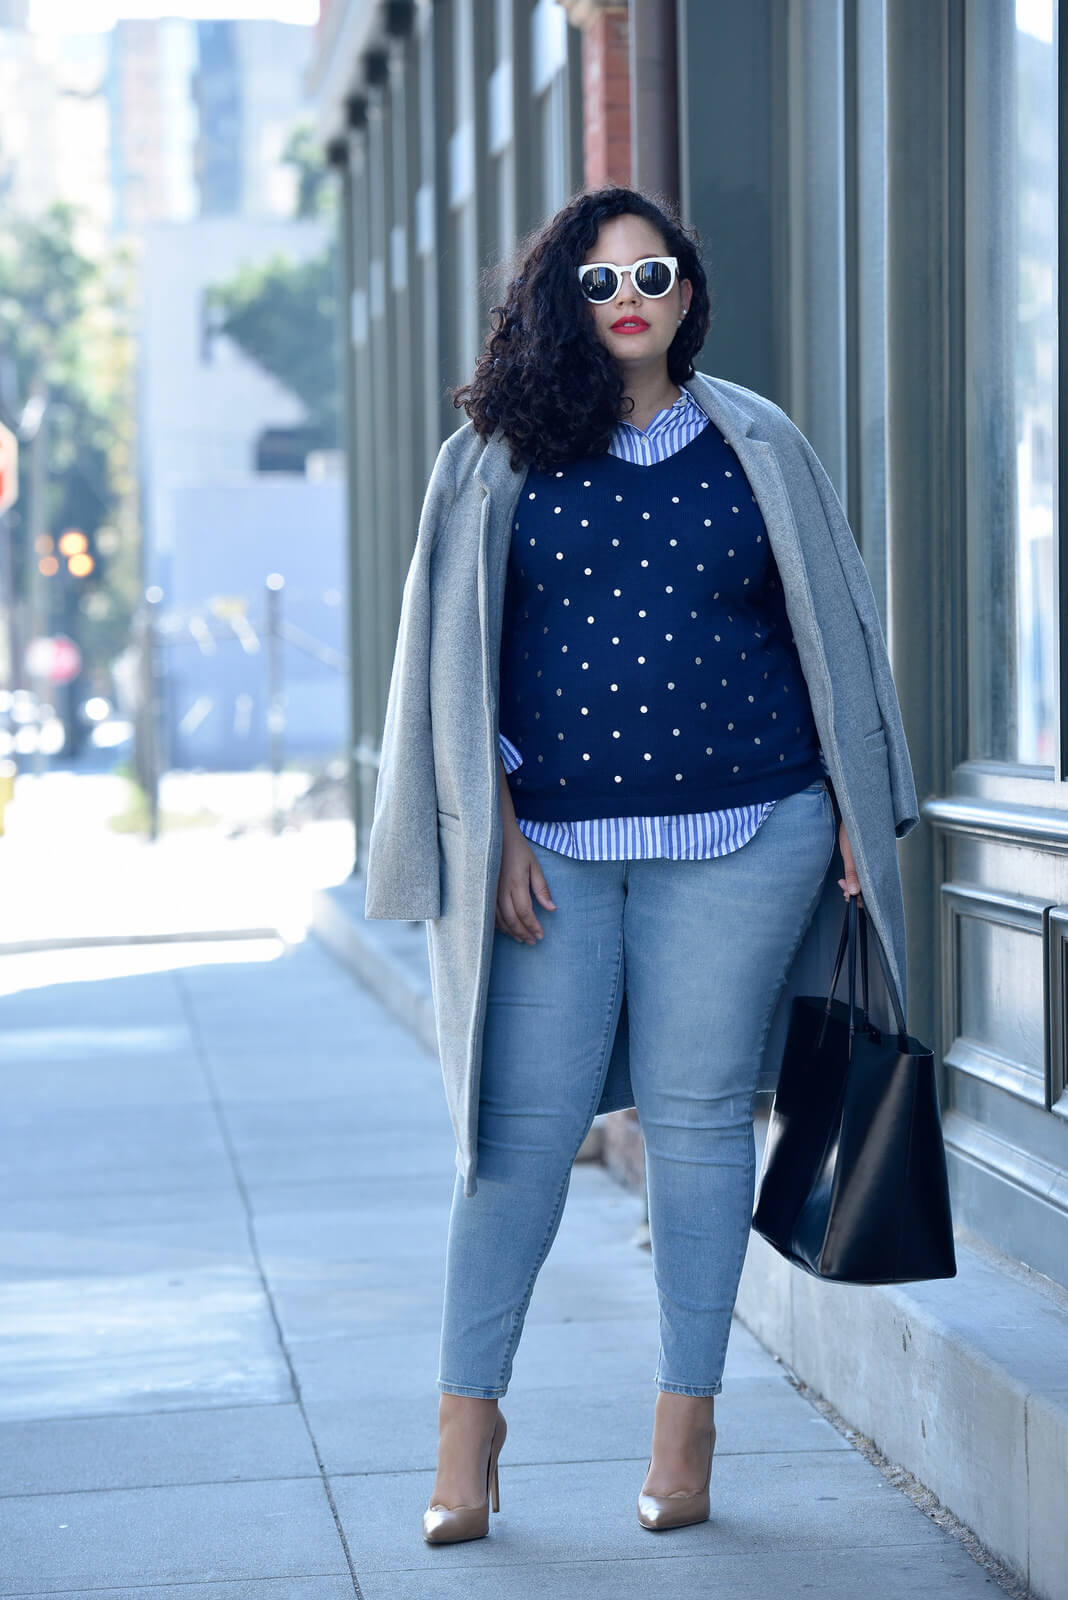 @GirlWithCurves featuring top, sweater, coat and jeans from Old Navy, Sunglasses from Asos, Shoes from Sam Edelman, and bag from Givenchy